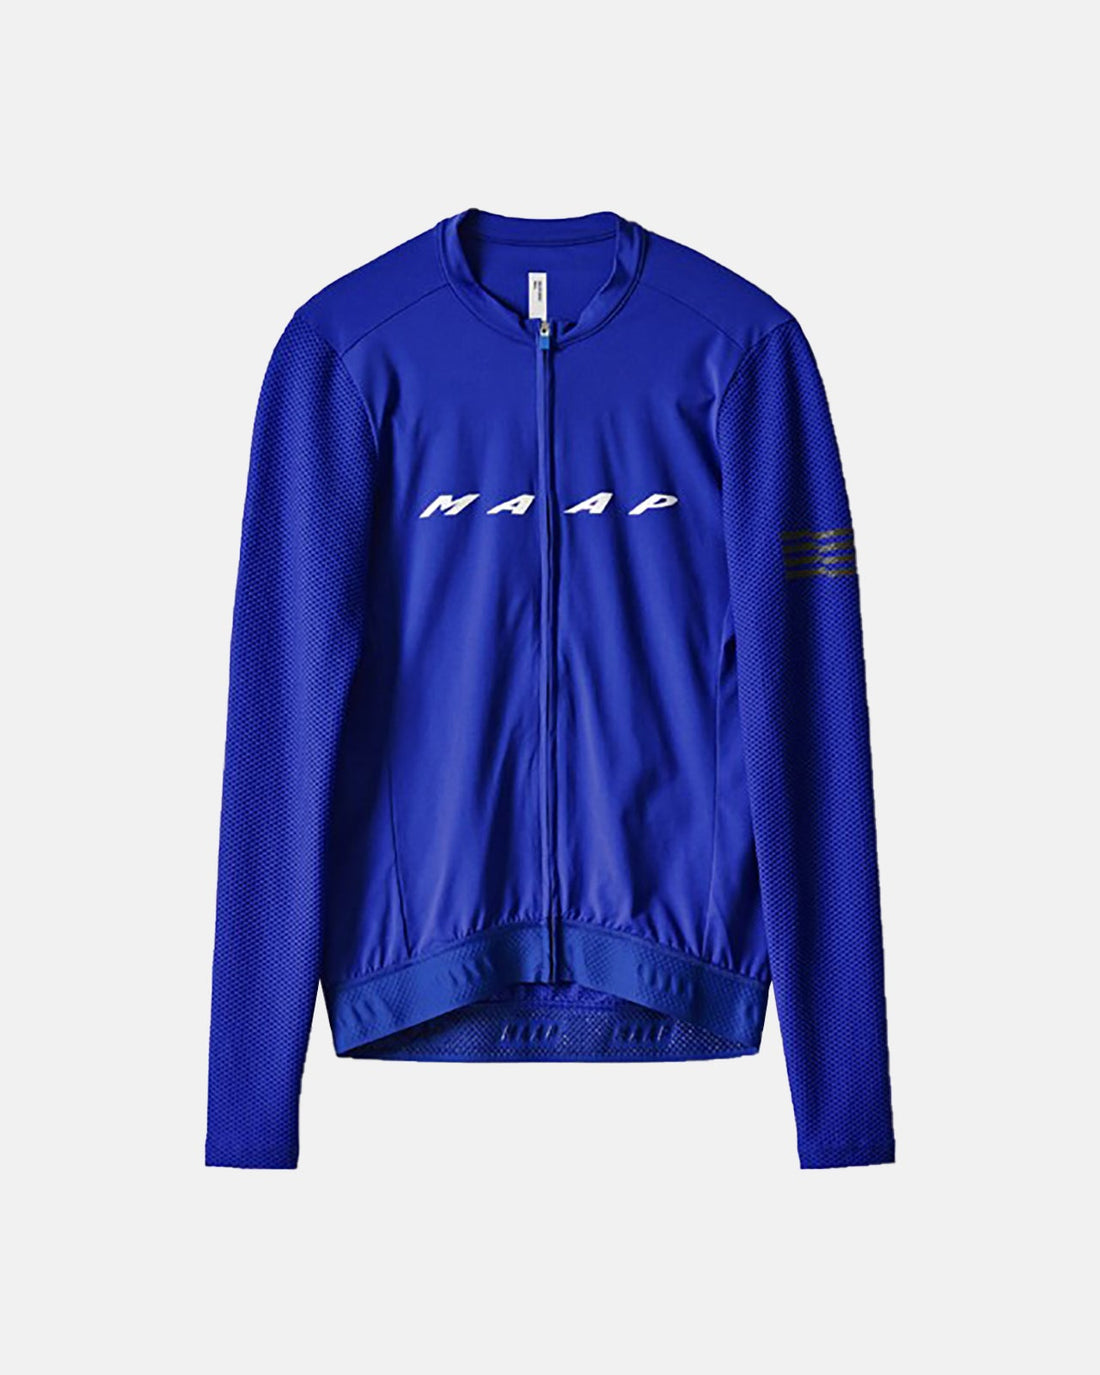 Evade Pro Base LS Jersey - Space Blue - MAAP